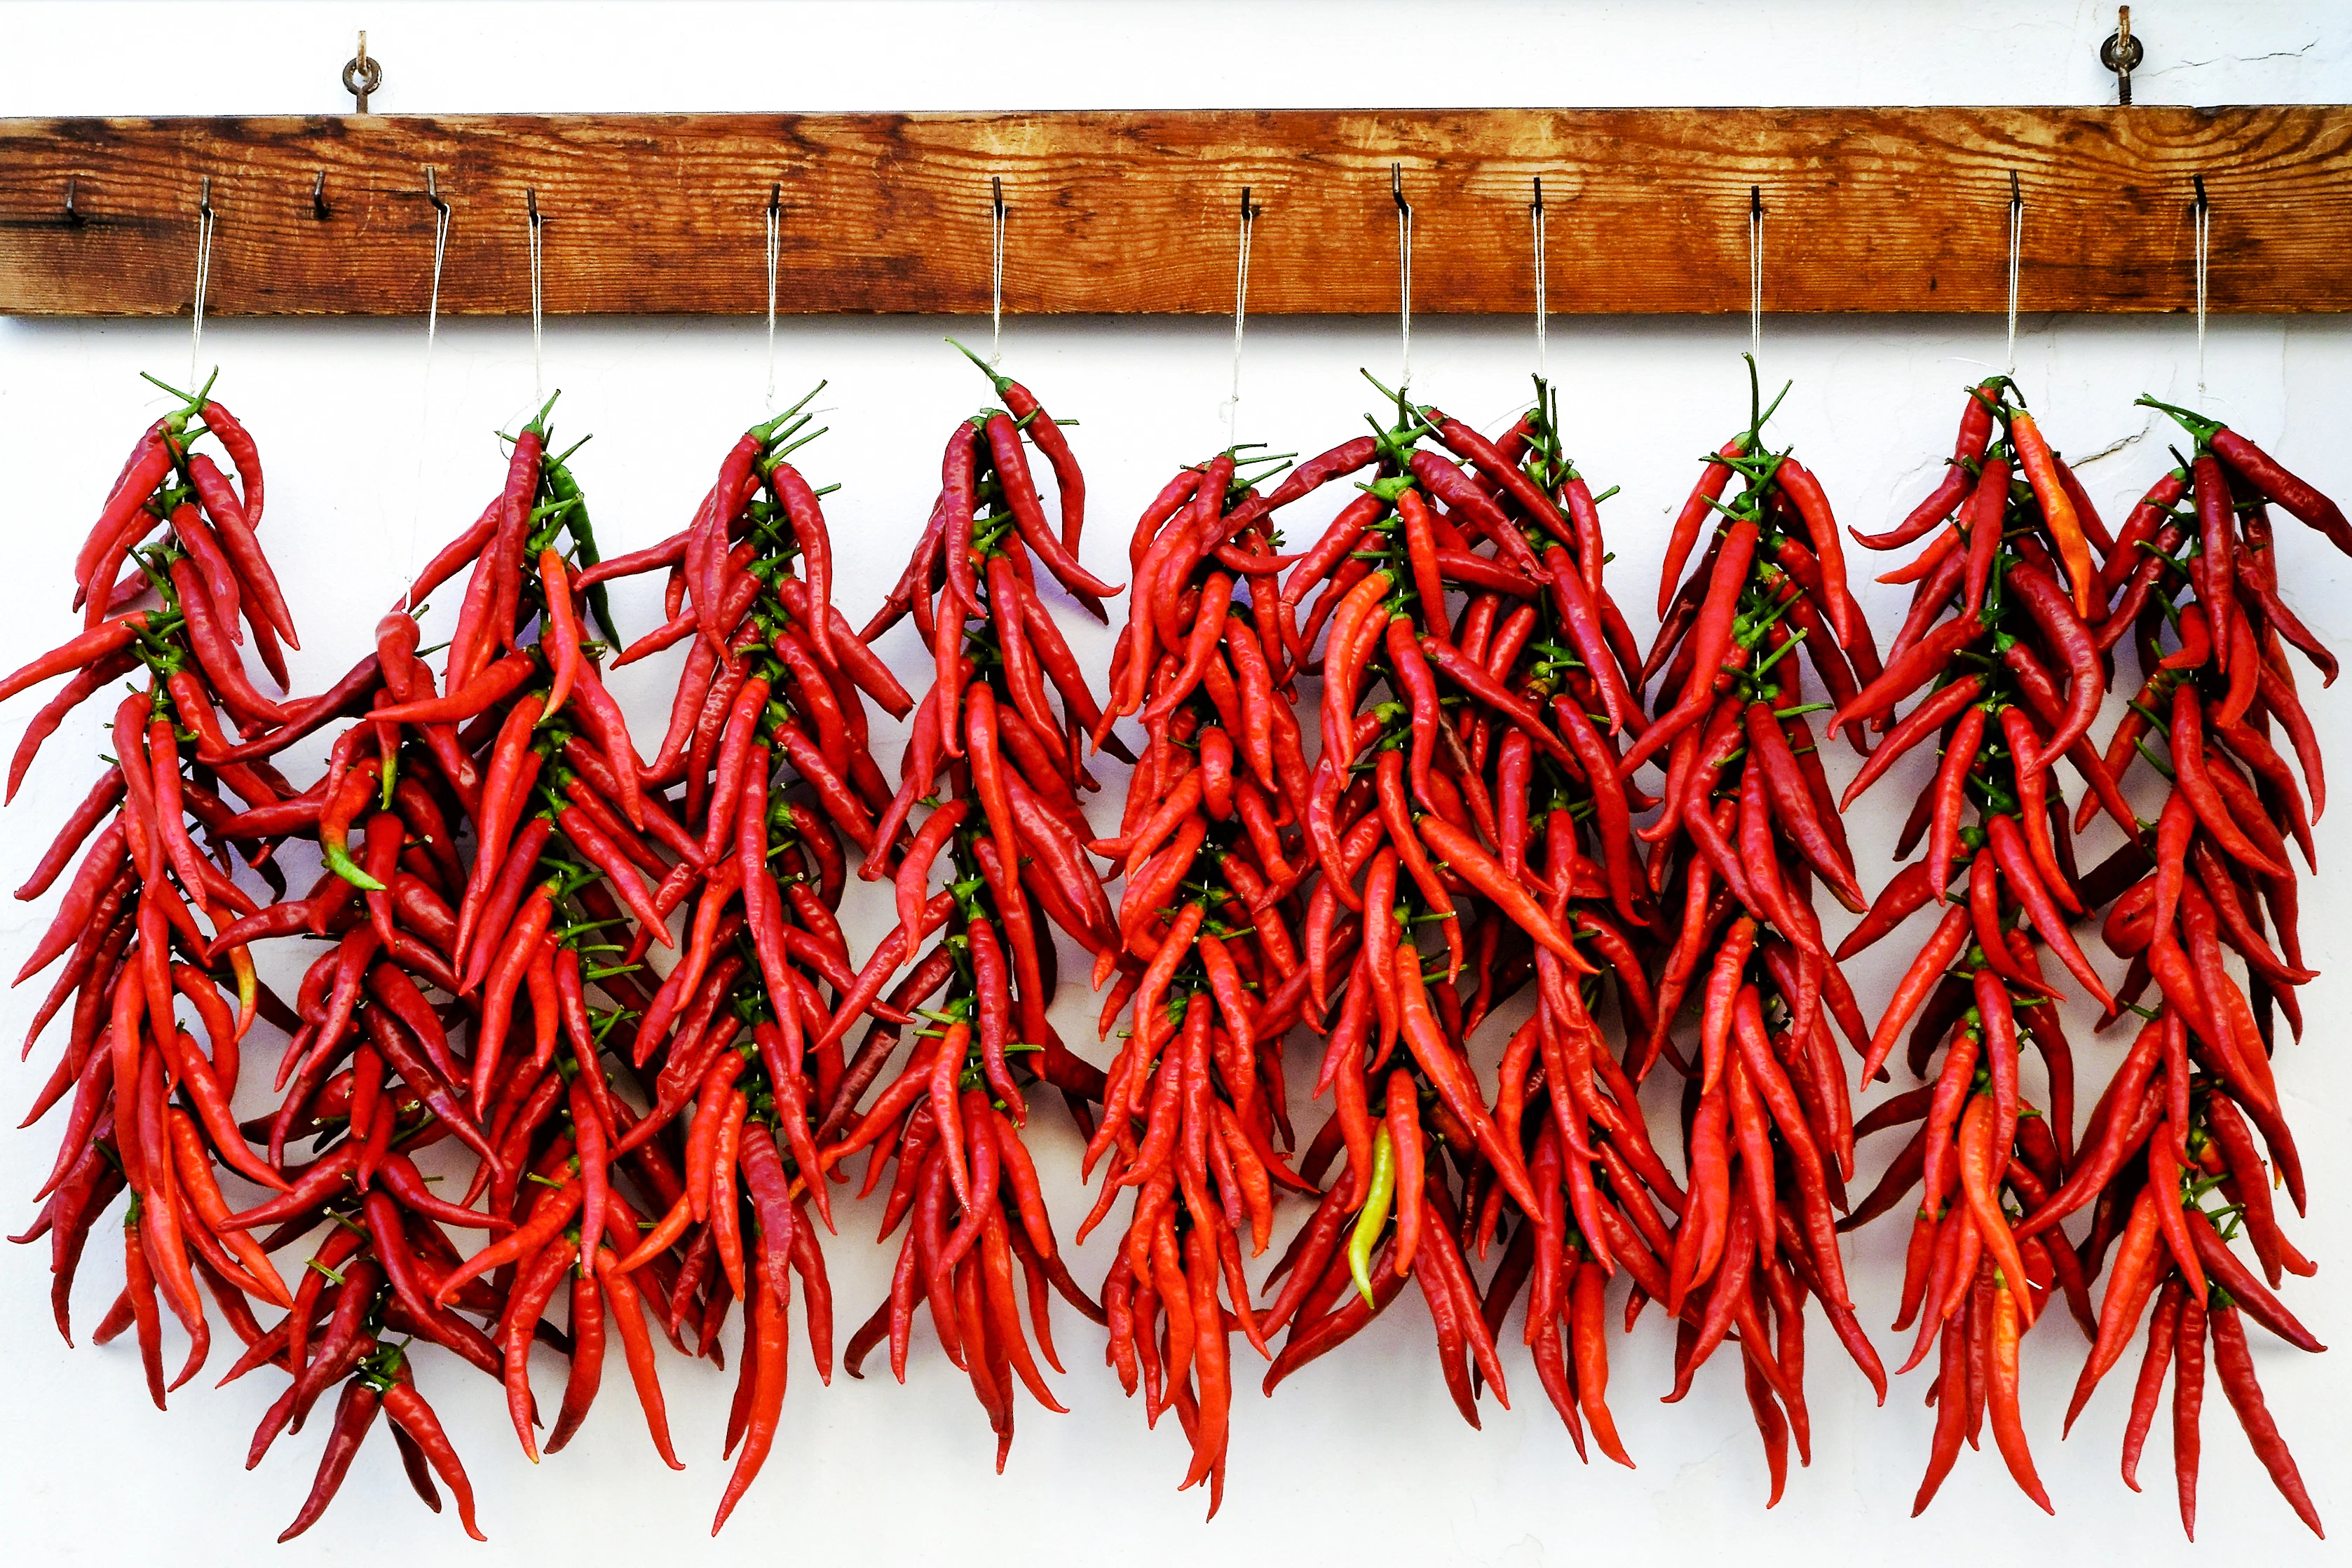 Bundles of red chillies hanging on strings